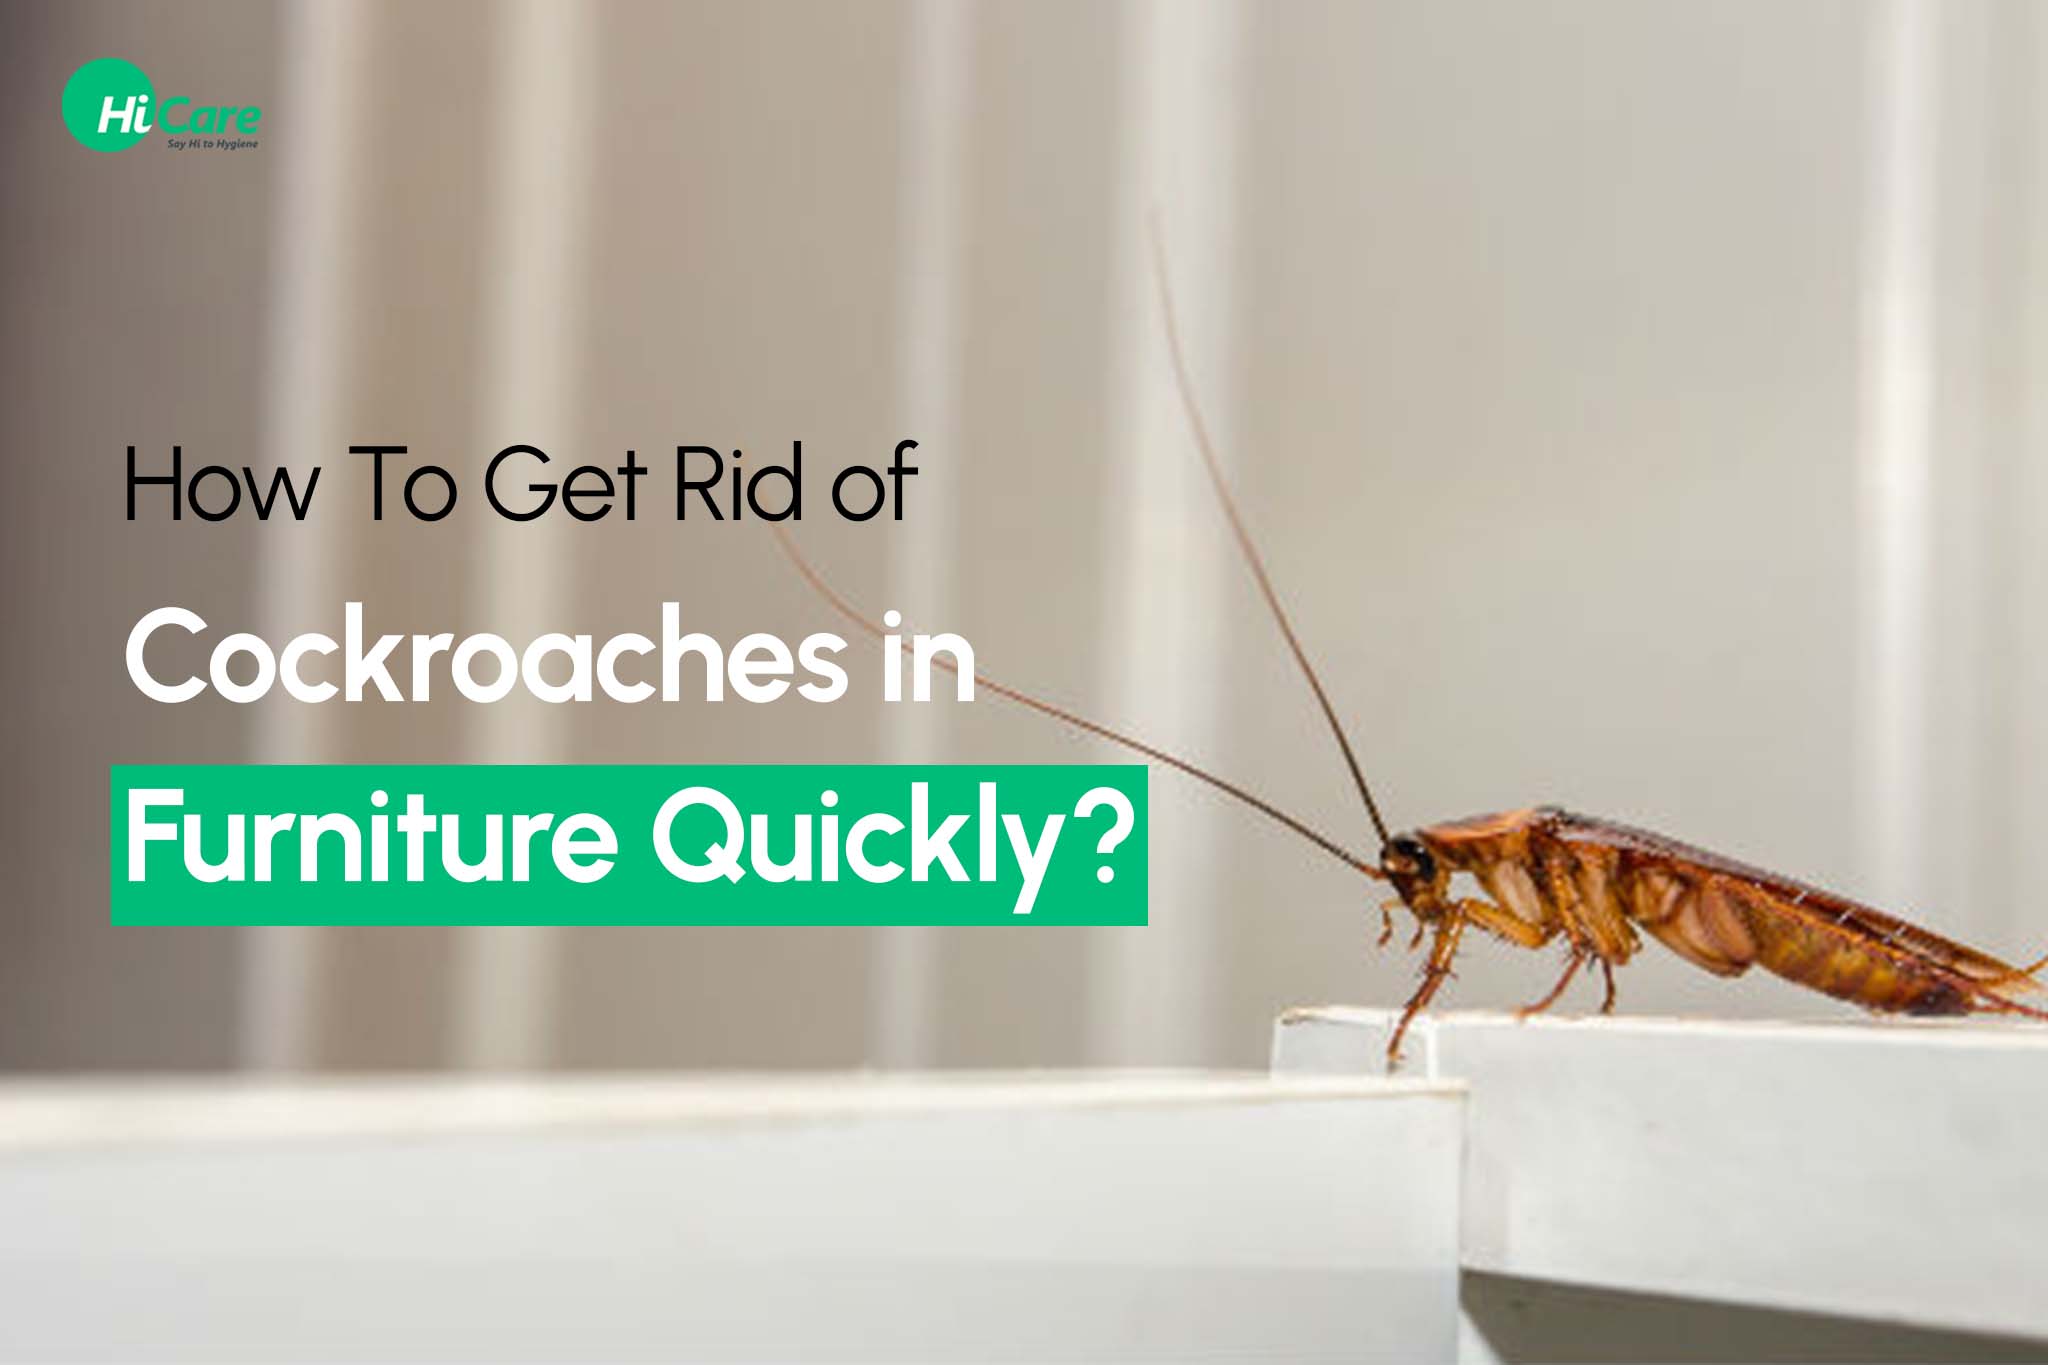 How to Get Rid of Cockroaches in Furniture: Quick and Easy Ways